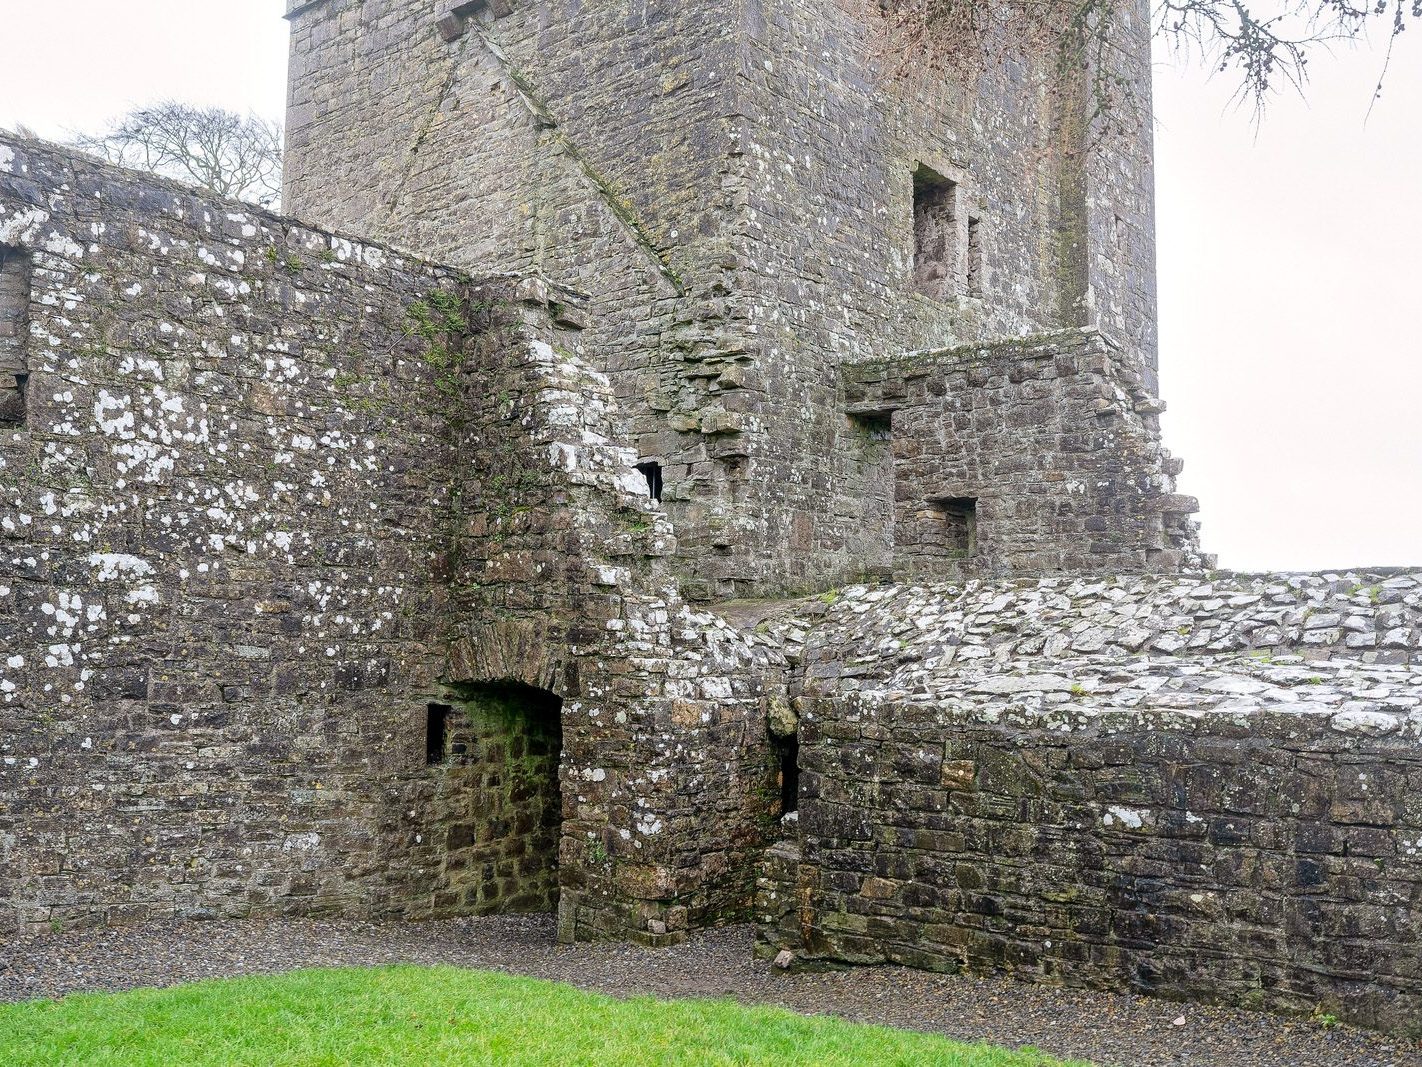 BECTIVE ABBEY WHICH I VISITED LAST CHRISTMAS [THERE WERE NO OTHER VISITORS AS IT WAS A VERY WET DAY]--225248-1